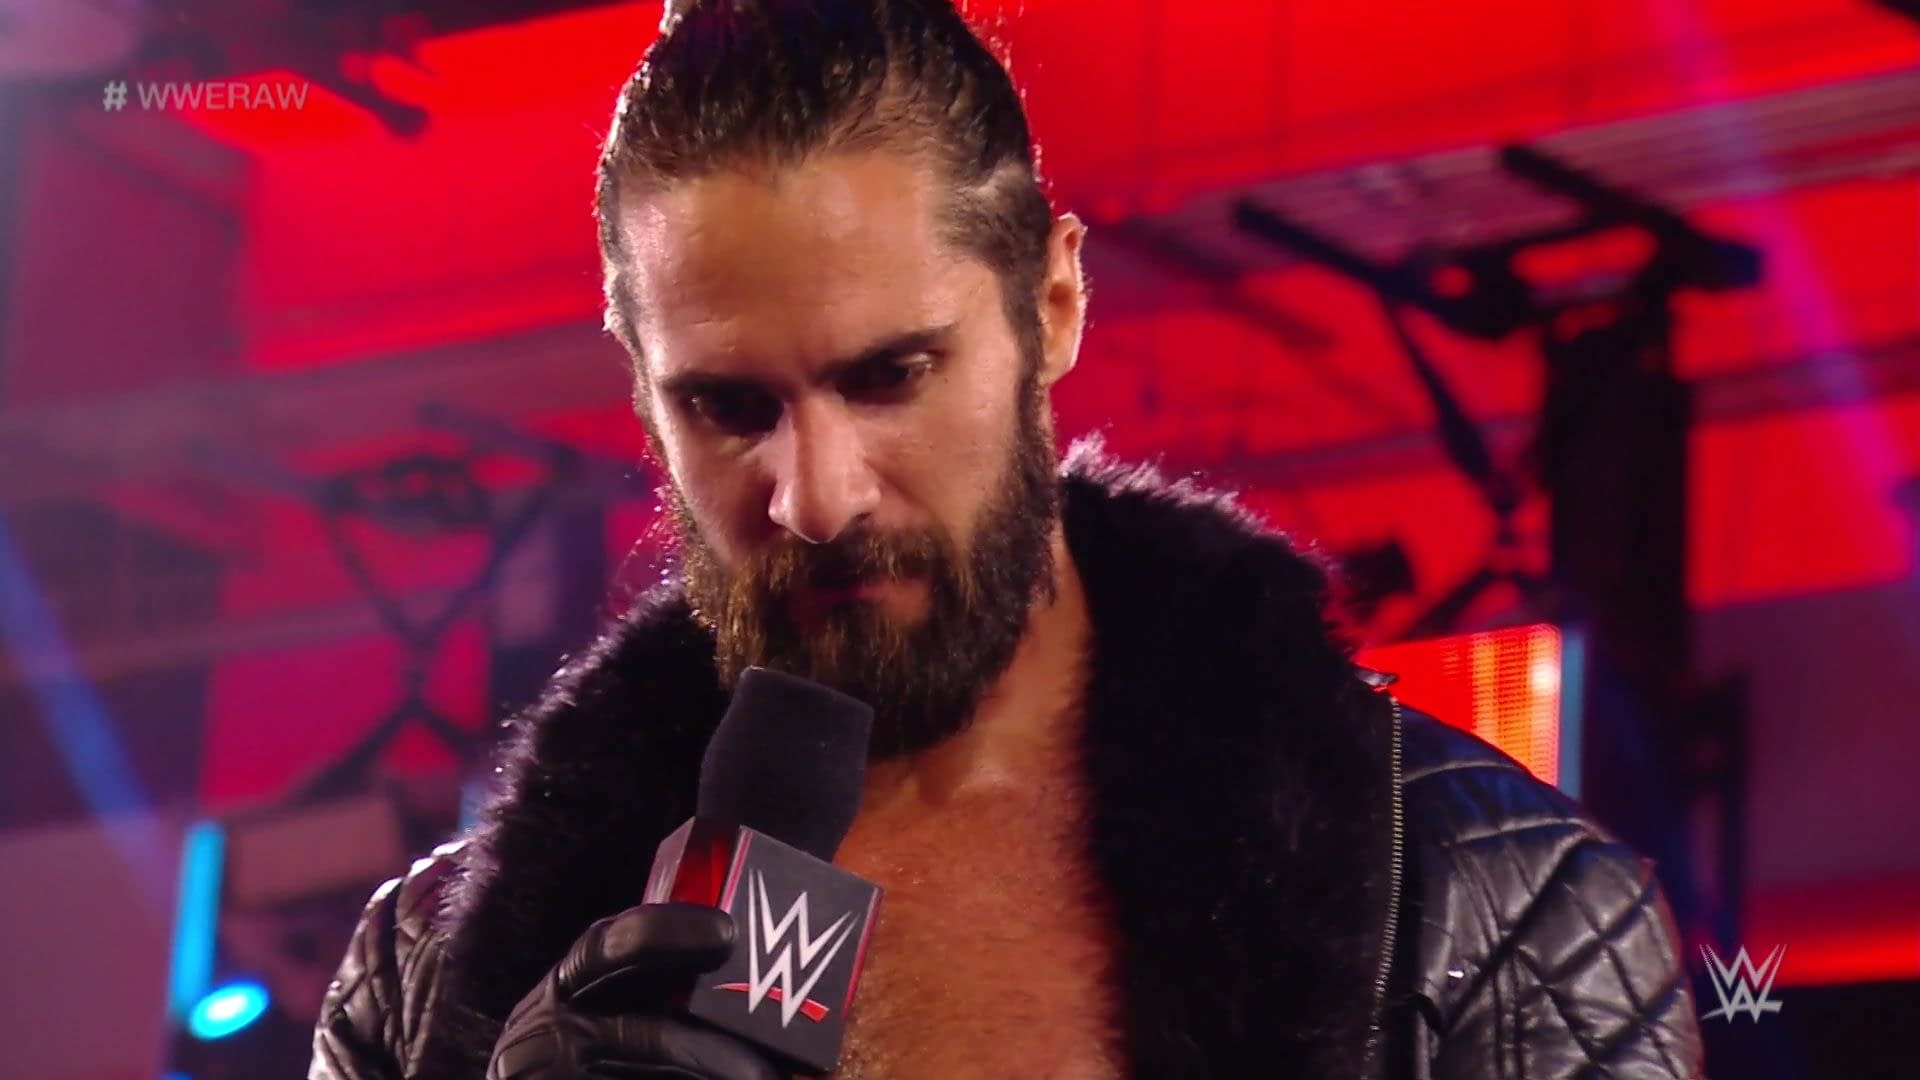 WWE Raw 6/13/20 Part 2: Seth Rollins Gets His Comeuppance Early
